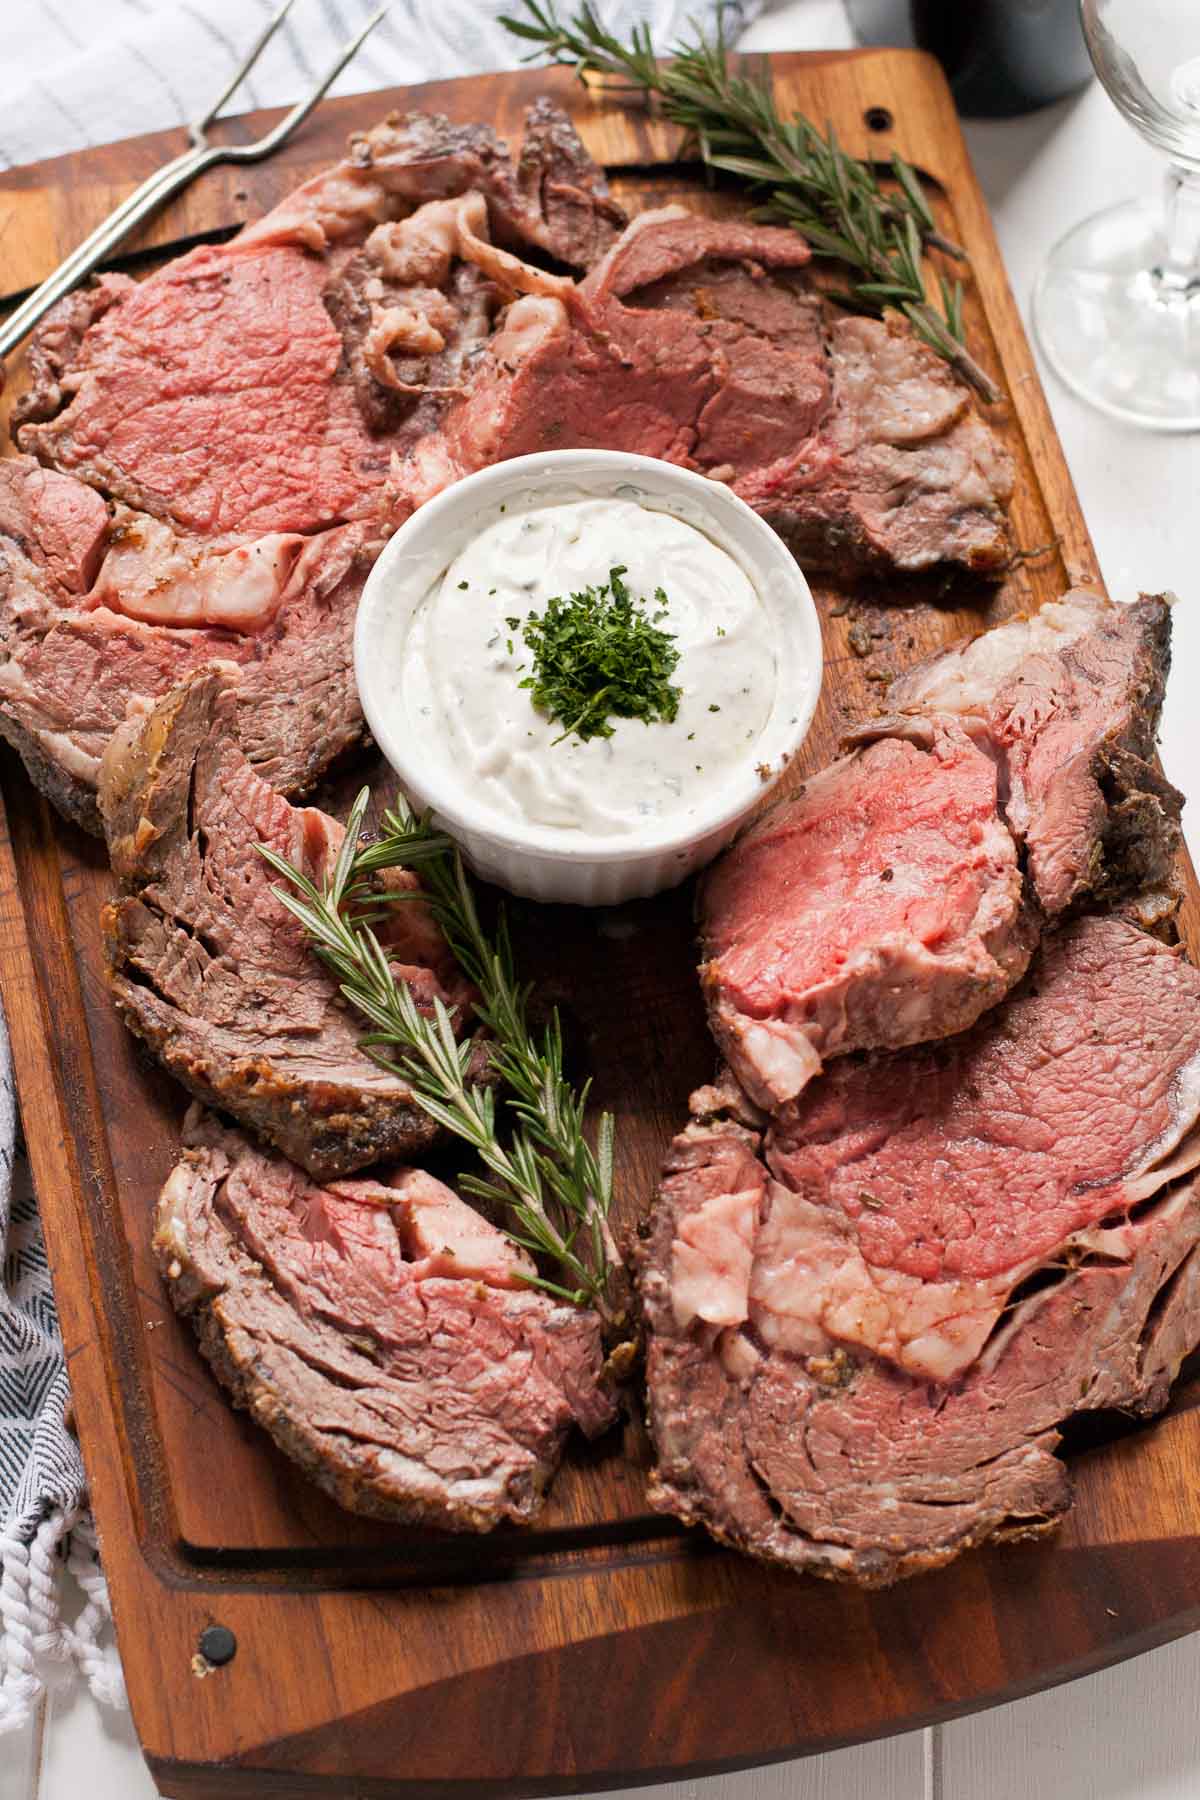 Garlic Rosemary Prime Rib Roast with Horseradish Cream--a gorgeous, simple meal for the holidays.